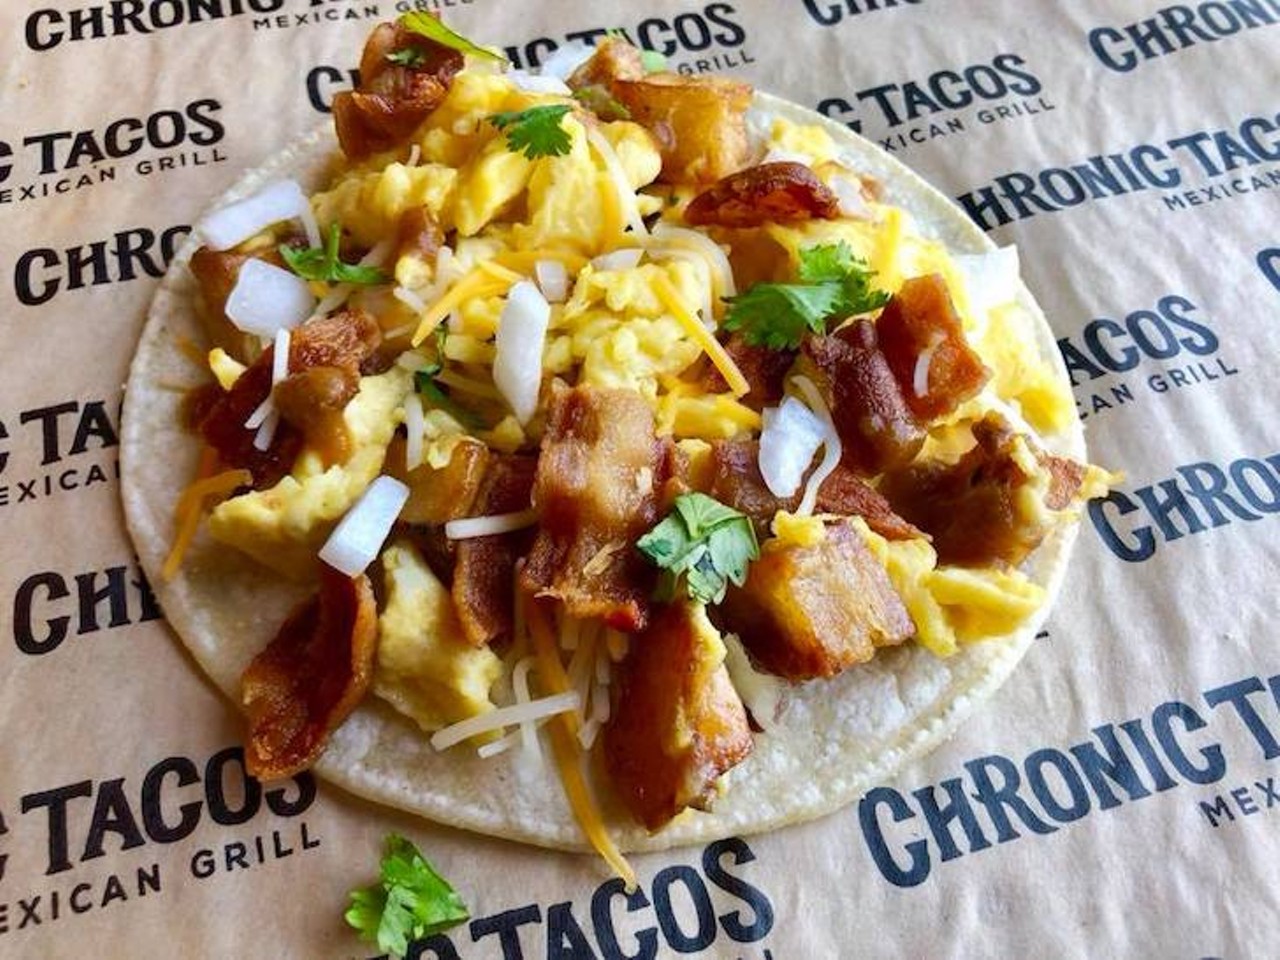 Chronic Tacos
7541 W. Sand Lake Road
Sure to satisfy your munchies, this Dr. Phillips taqueria experienced a long delay in opening its build-a-taco concept &#150; though, really, it's not all too surprising given the joint's name is Chronic Tacos.
Photo via Chronic Tacos/Facebook